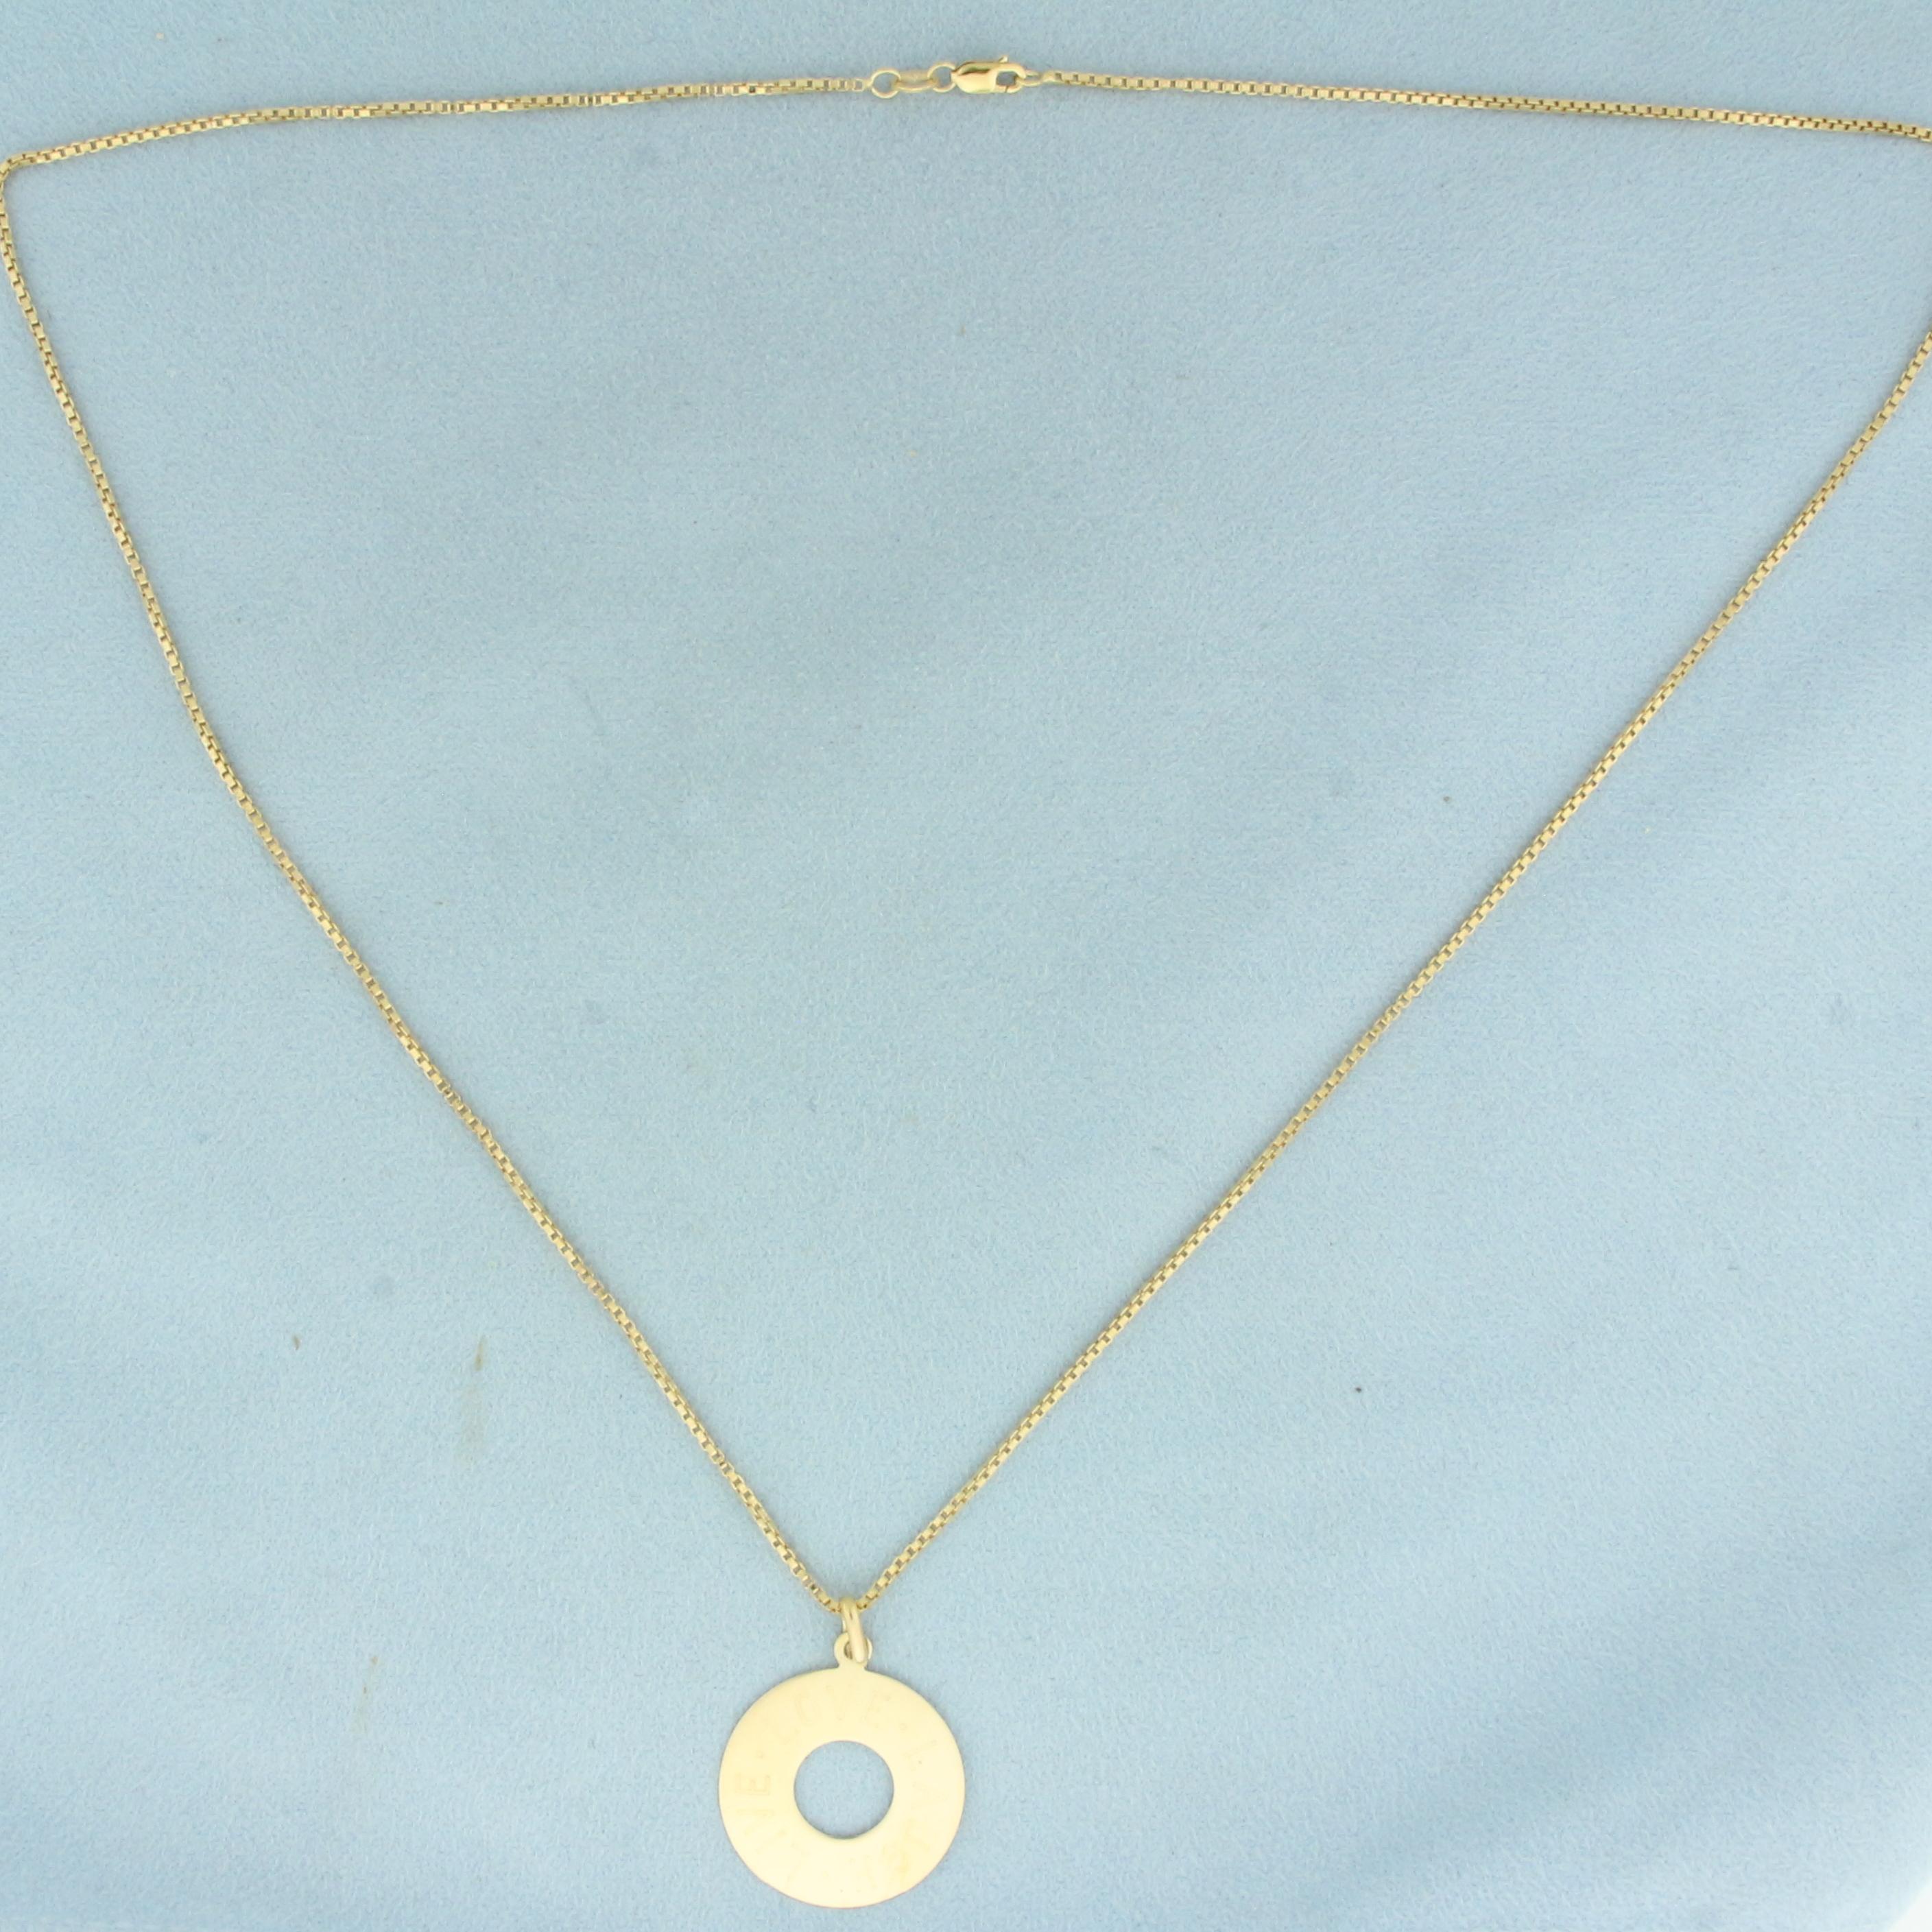 Italian Live Laugh Love Necklace In 14k Yellow Gold